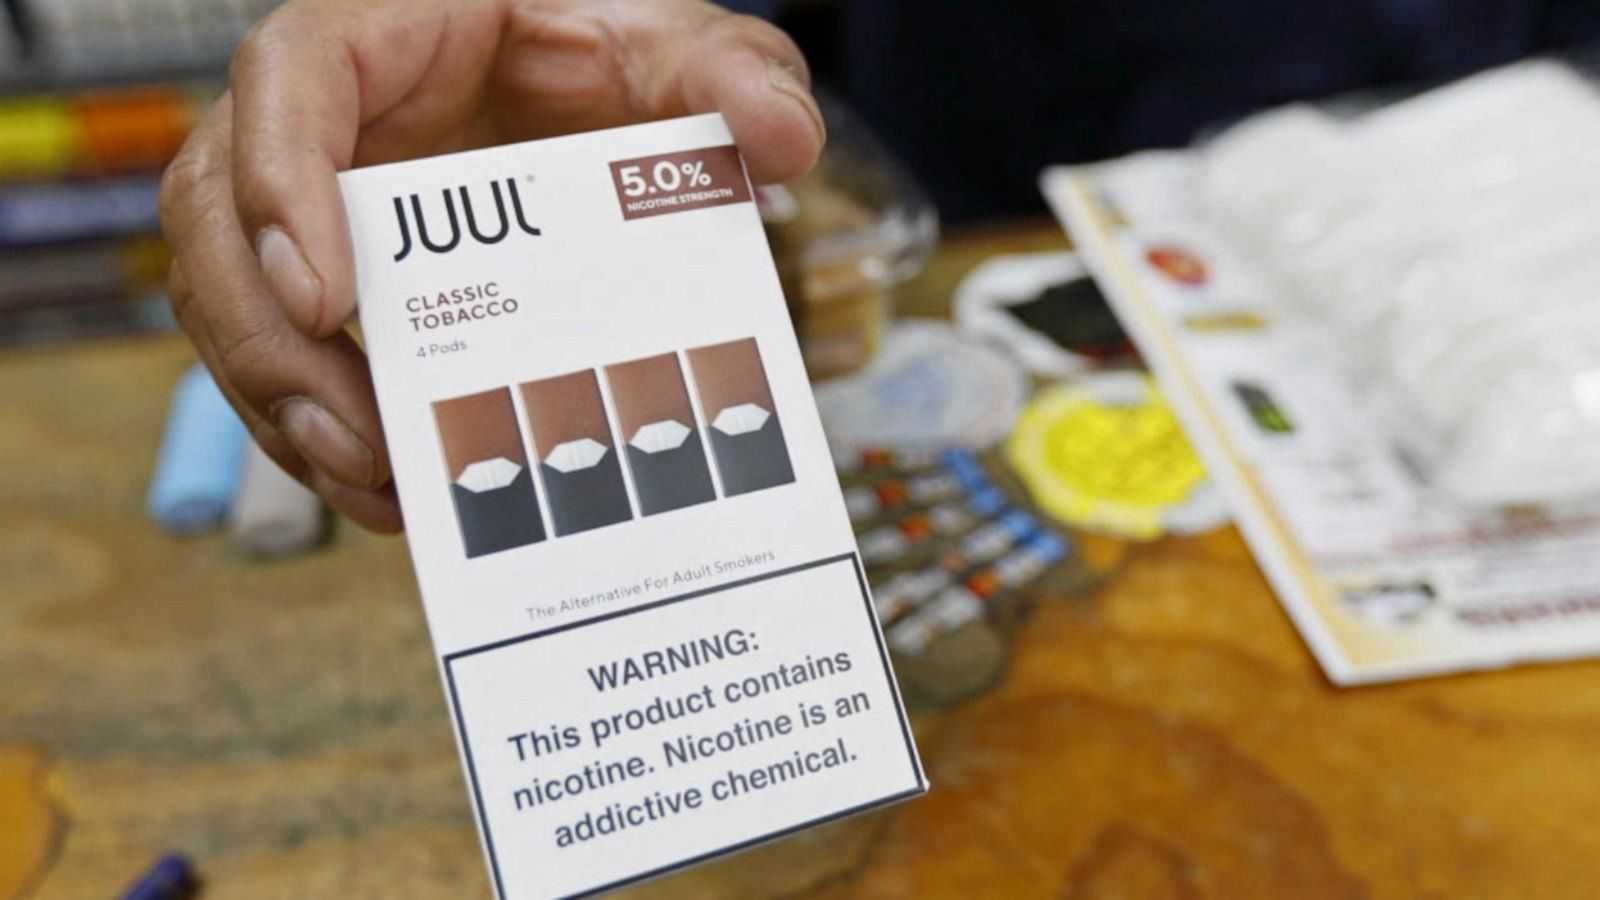 VIDEO: Ex-Juul executive sues over allegedly contaminated pods